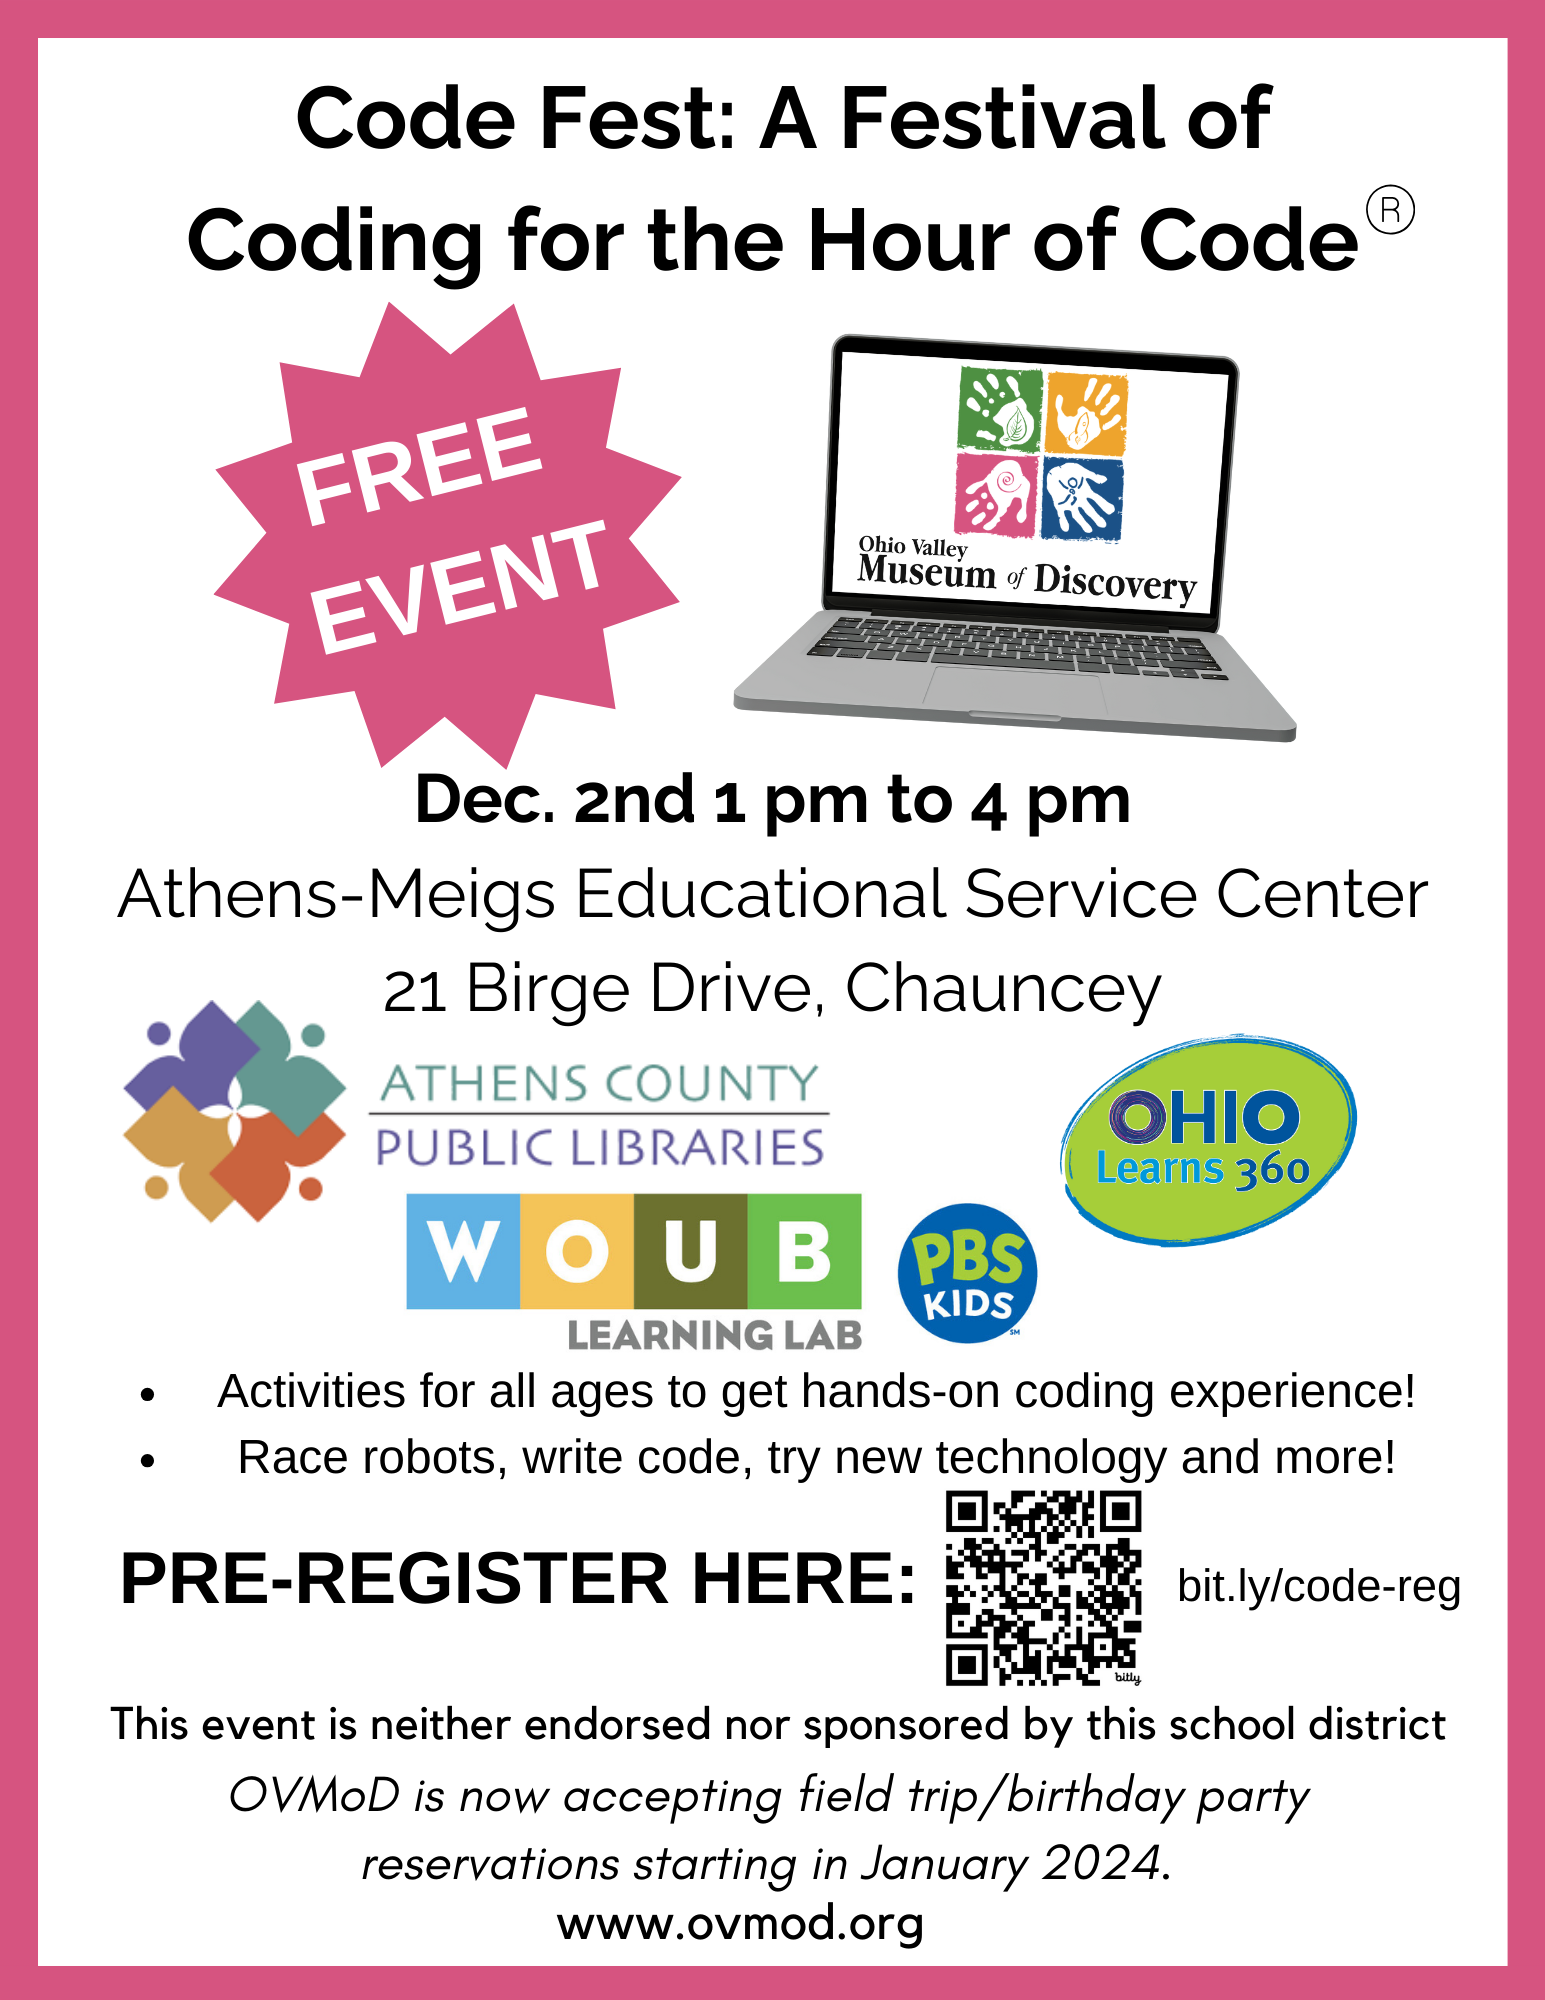 A flyer advertising Code Fest: A Festival of Coding for the Hour of Code.